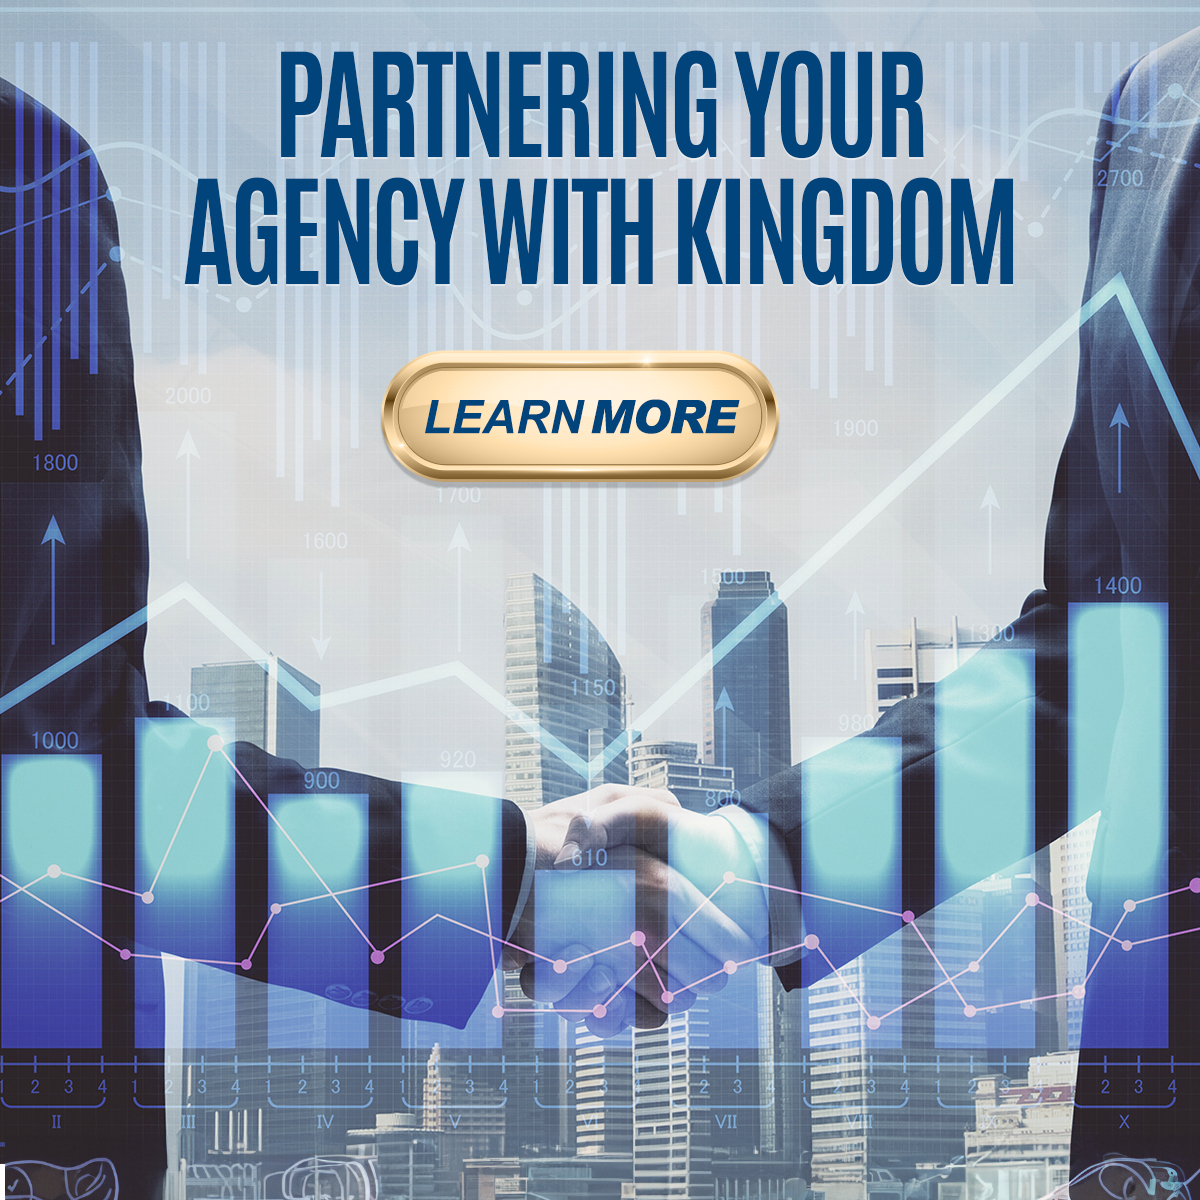 Partnering your agency with Kingdom. Learn more button.